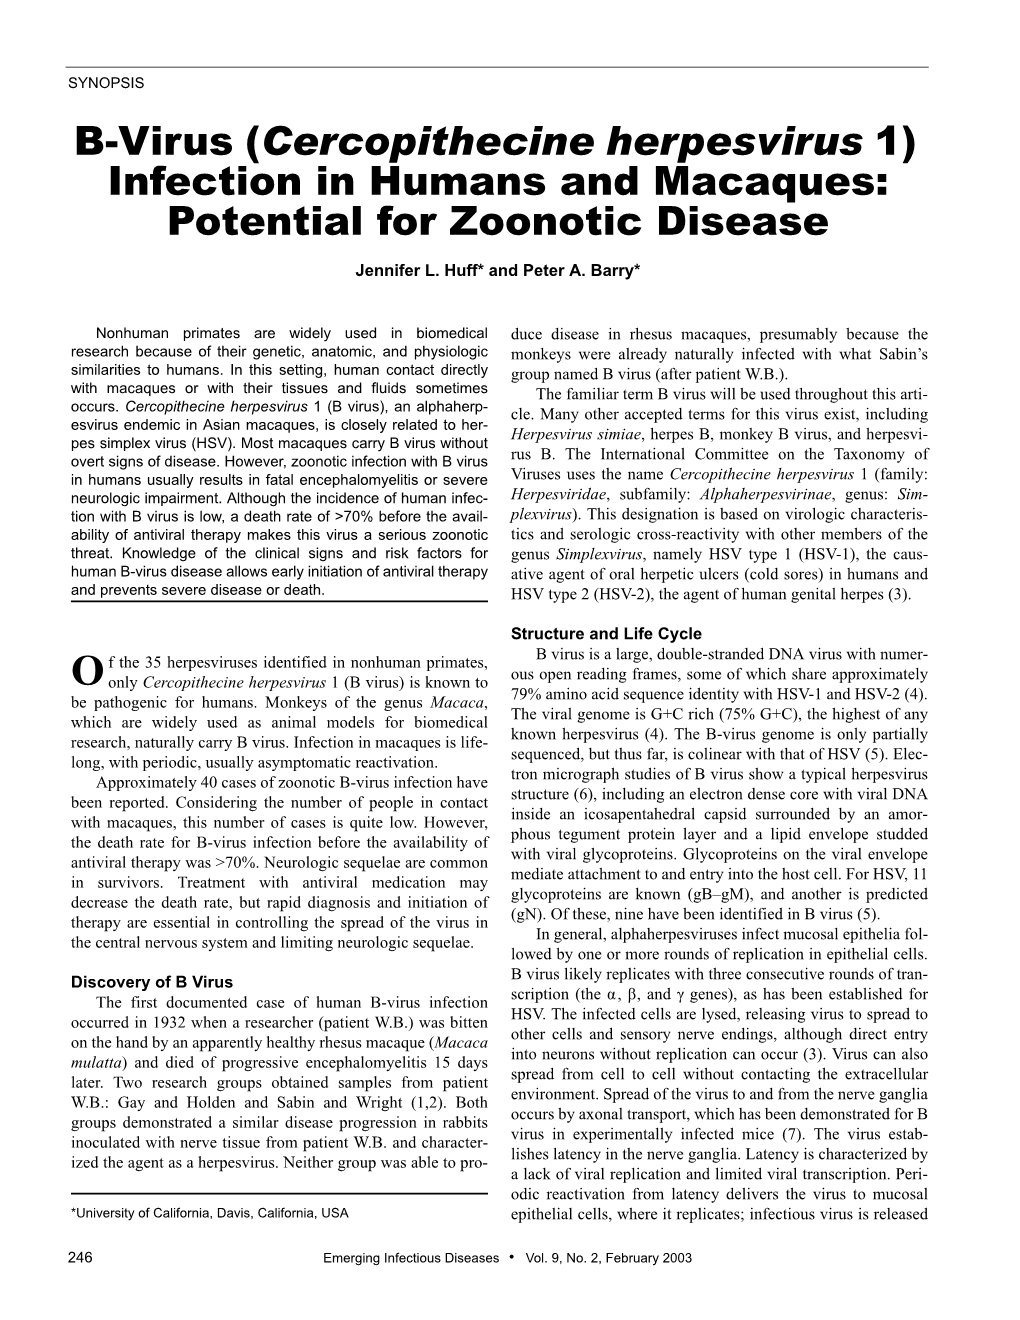 B-Virus (Cercopithecine Herpesvirus 1) Infection in Humans and Macaques: Potential for Zoonotic Disease Jennifer L